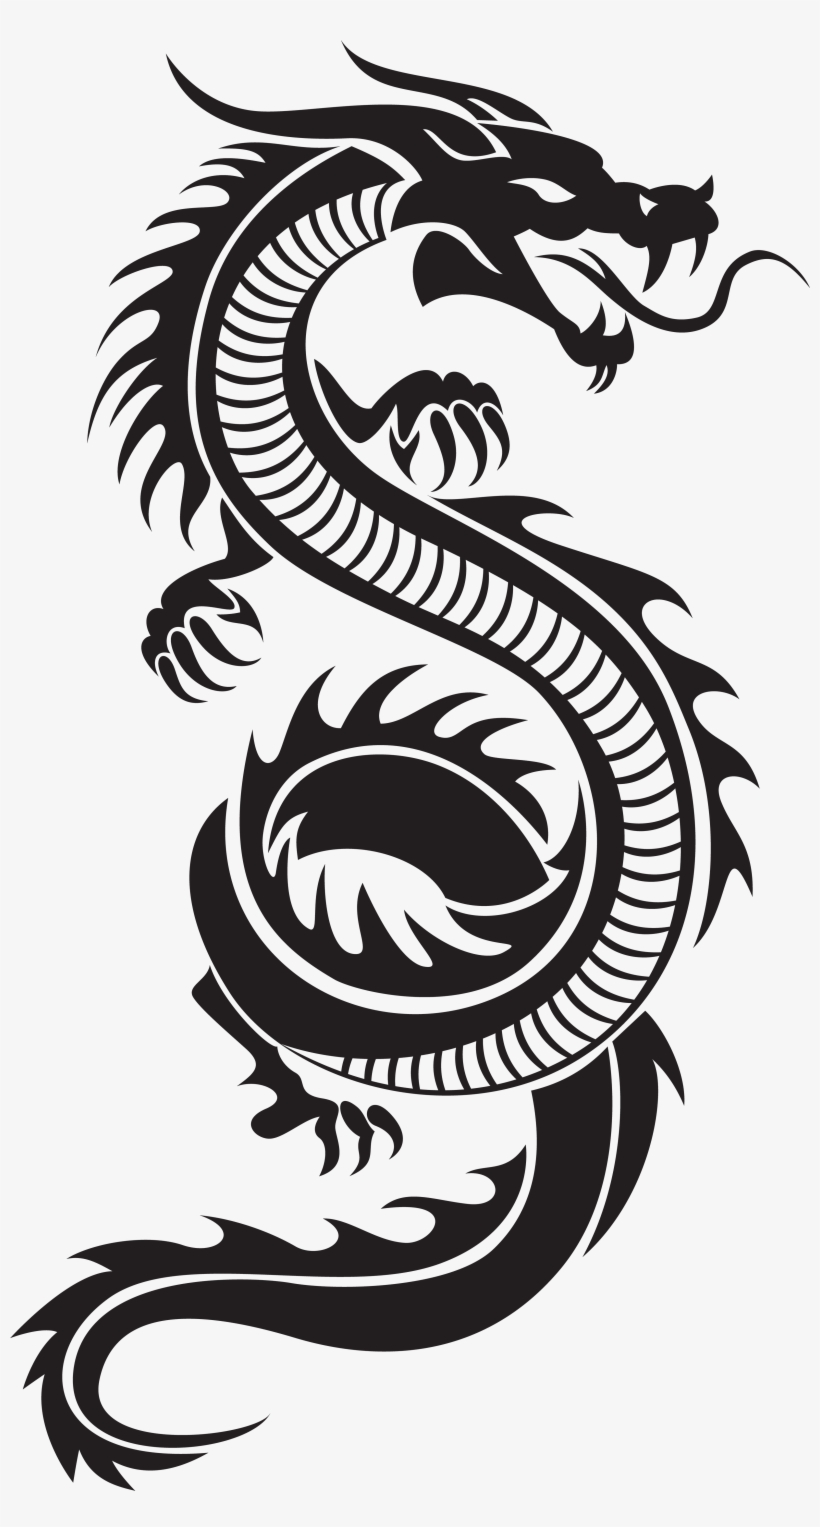 Chinese Dragon Silhouette Png Clip Art - Chinese Dragon Silhouette Png, transparent png #166642